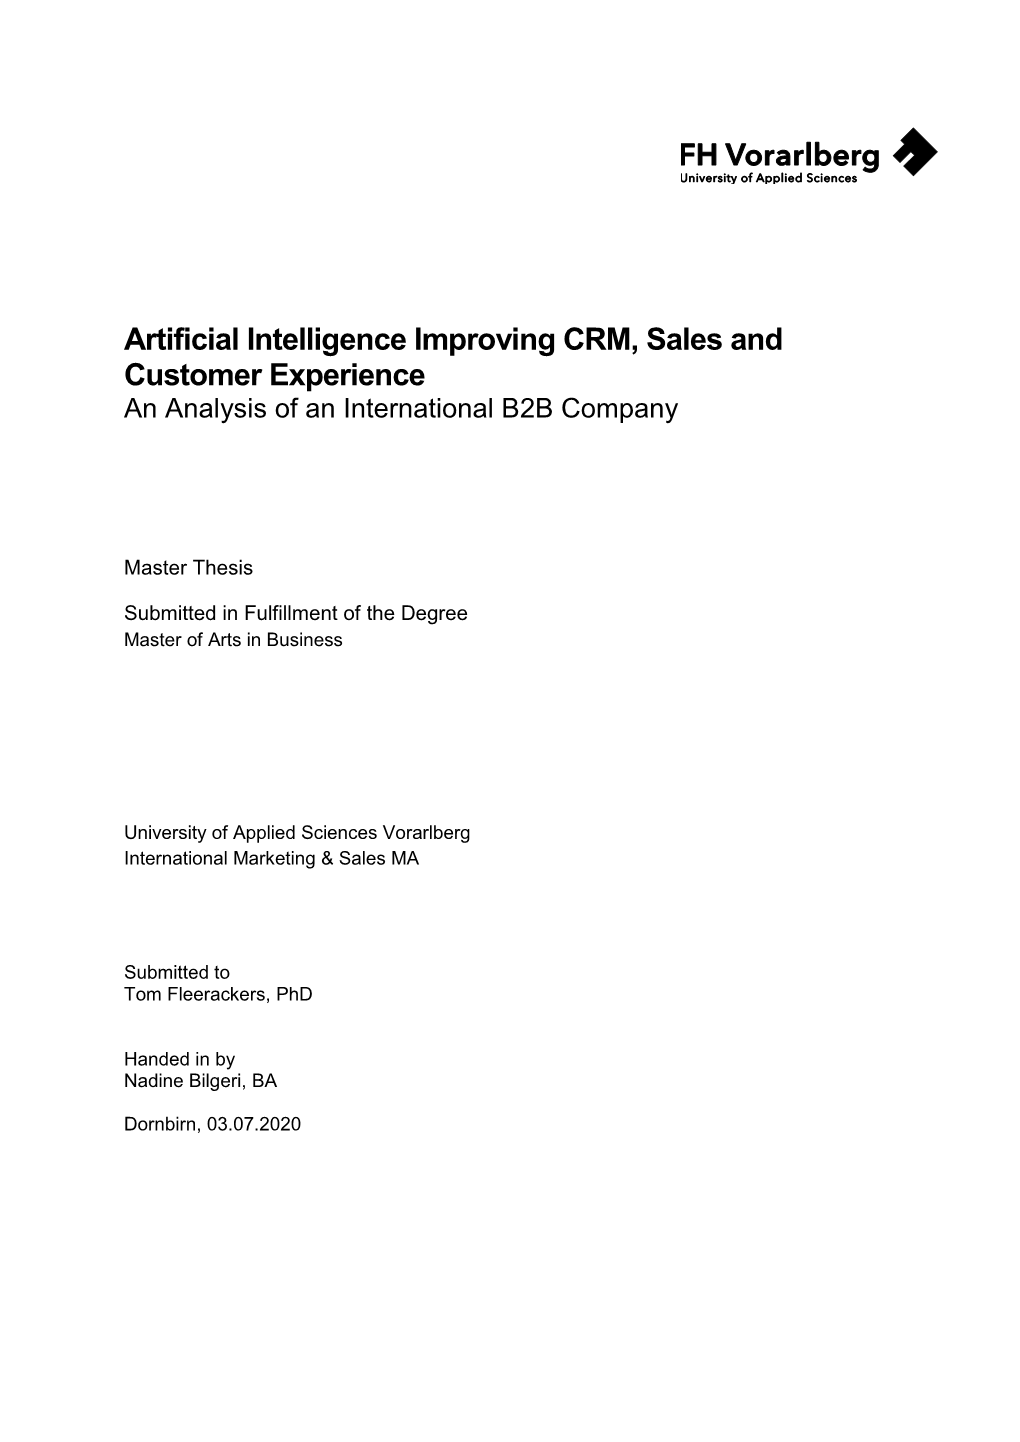 Artificial Intelligence Improving CRM, Sales and Customer Experience an Analysis of an International B2B Company